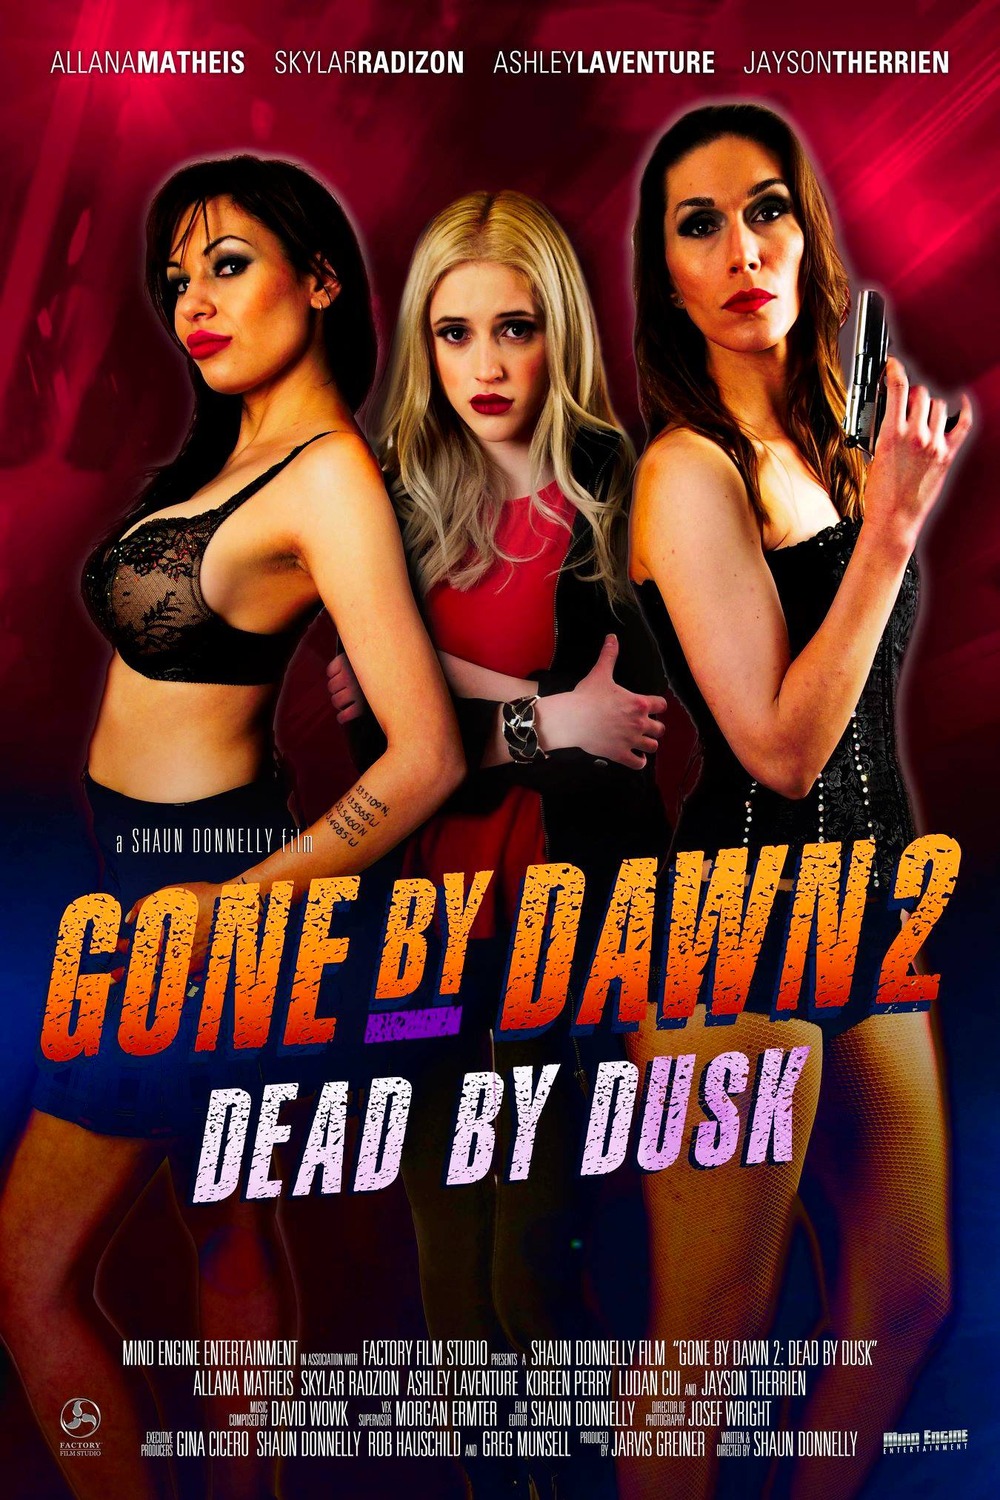 Extra Large Movie Poster Image for Gone by Dawn 2: Dead by Dusk 